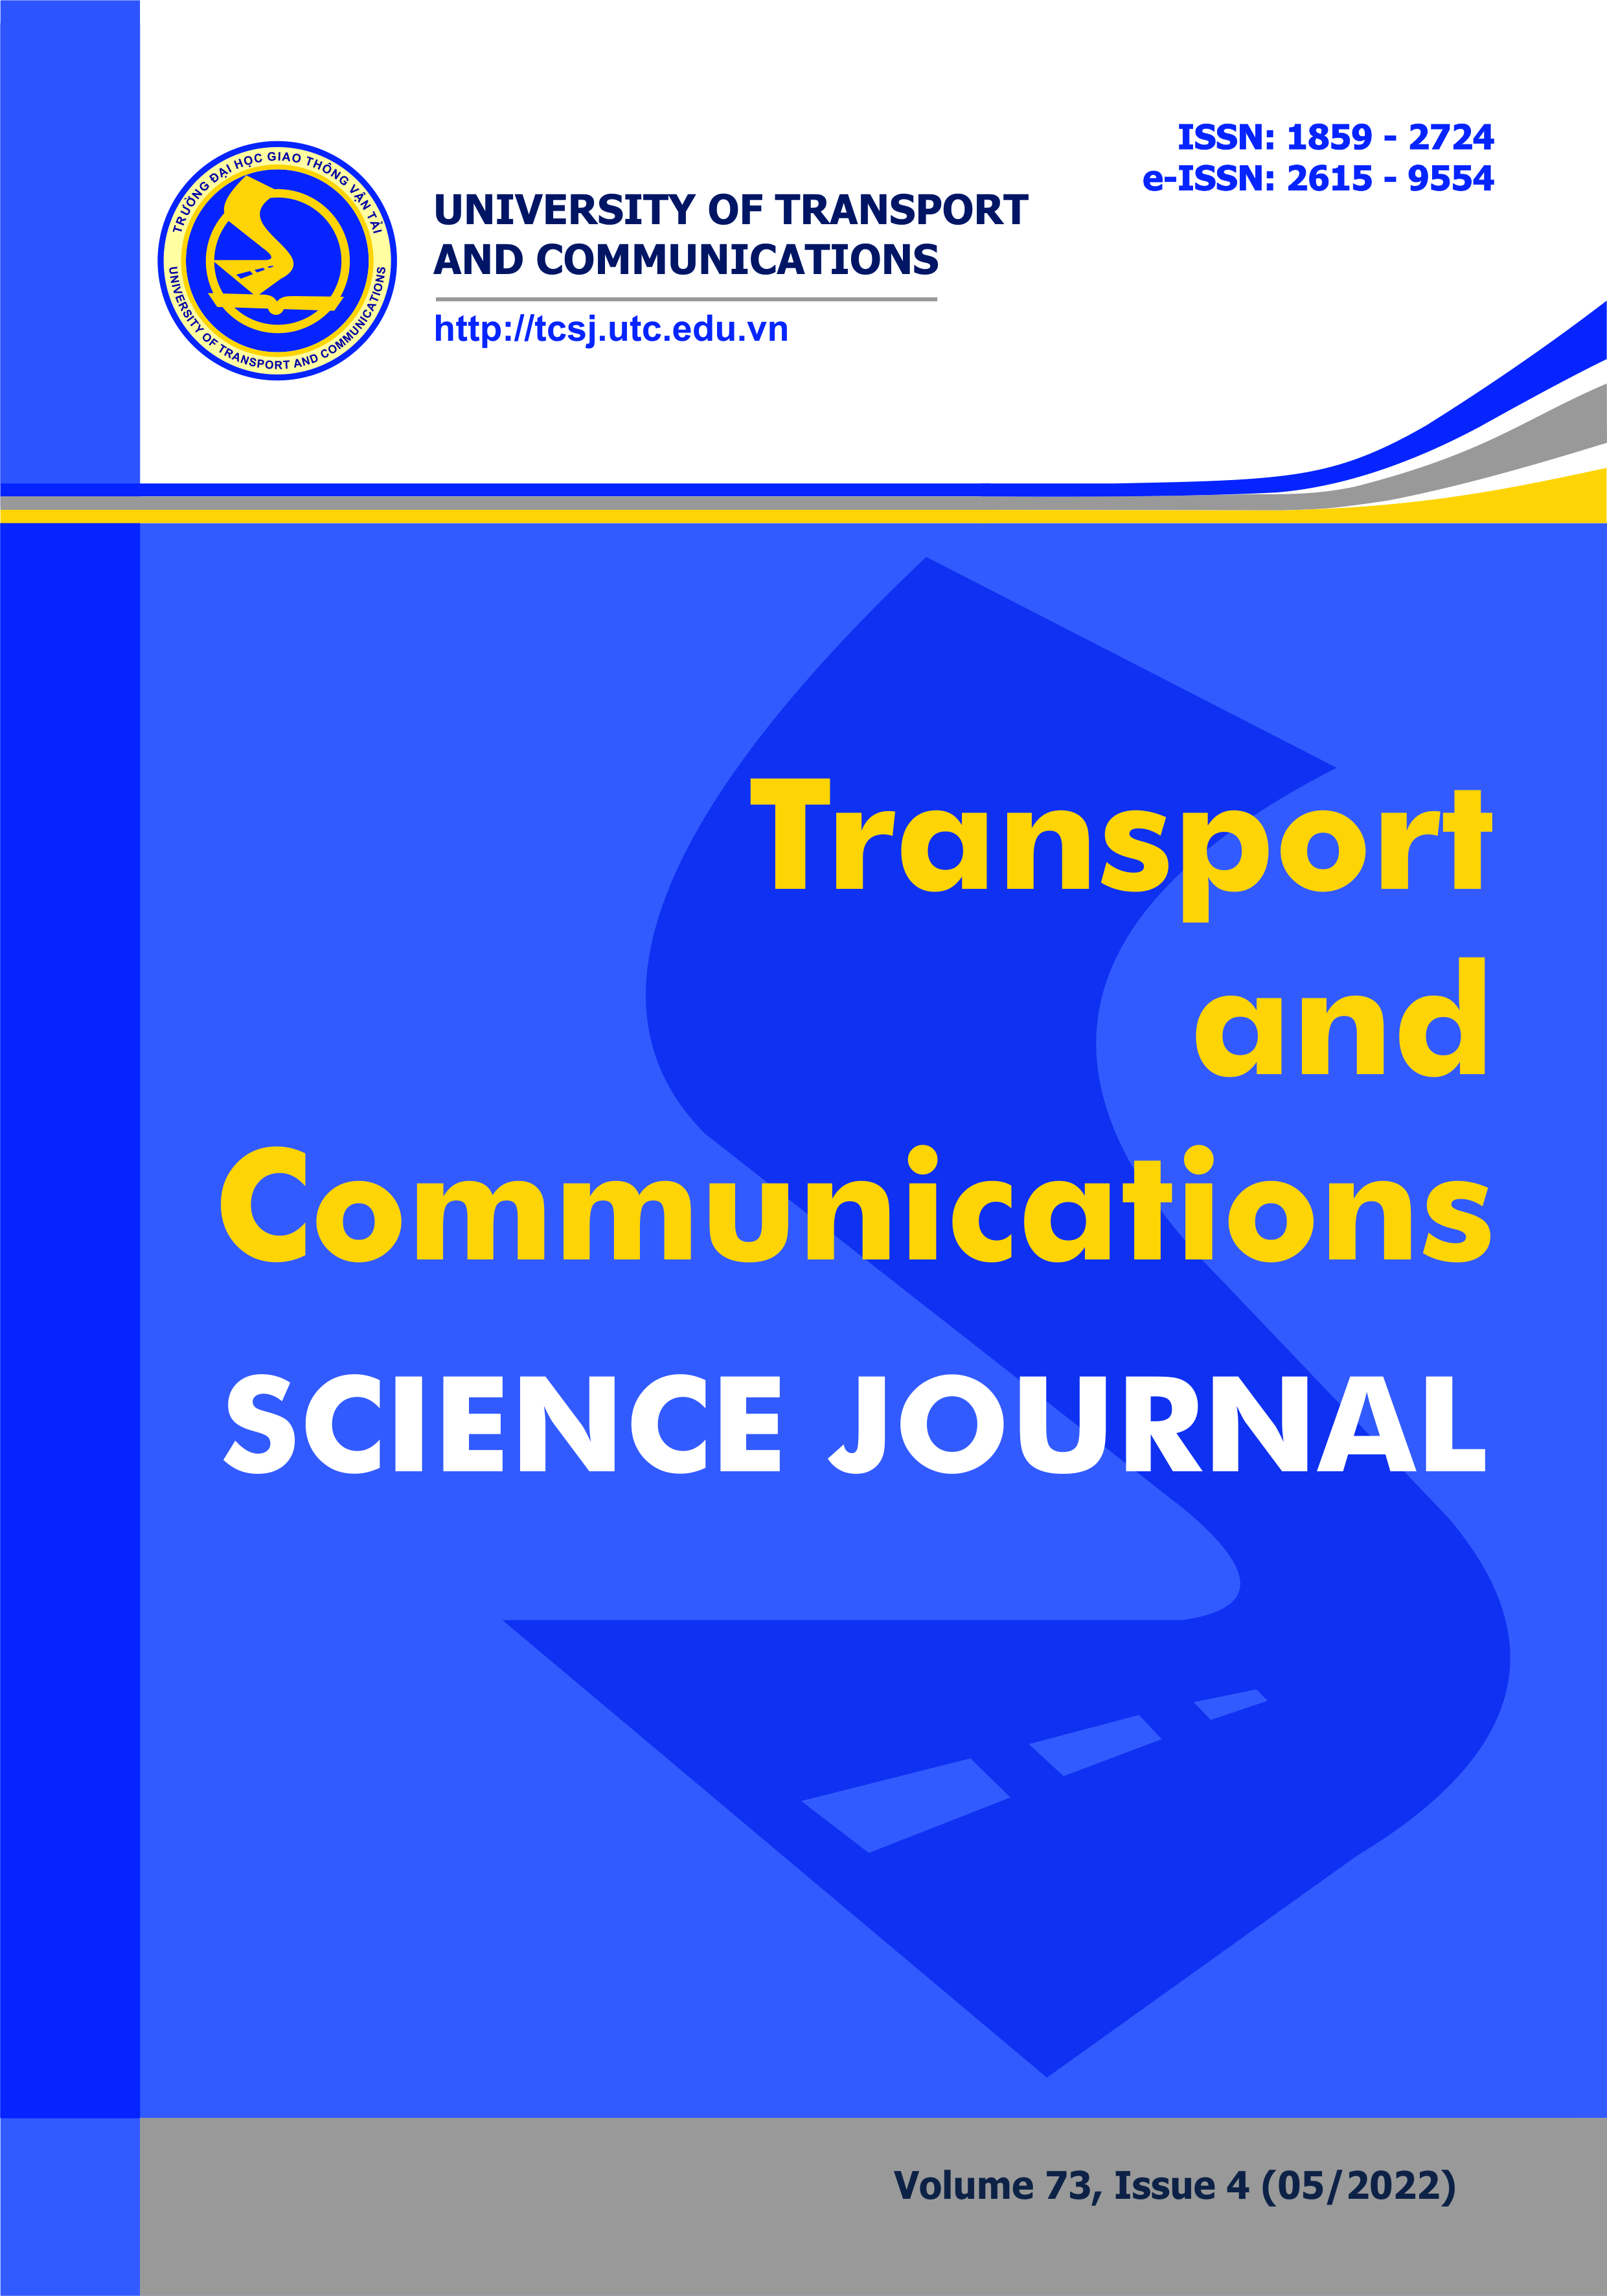 A fuzzy-based methodology for anticipating trend of incident traffic congestion on expressways